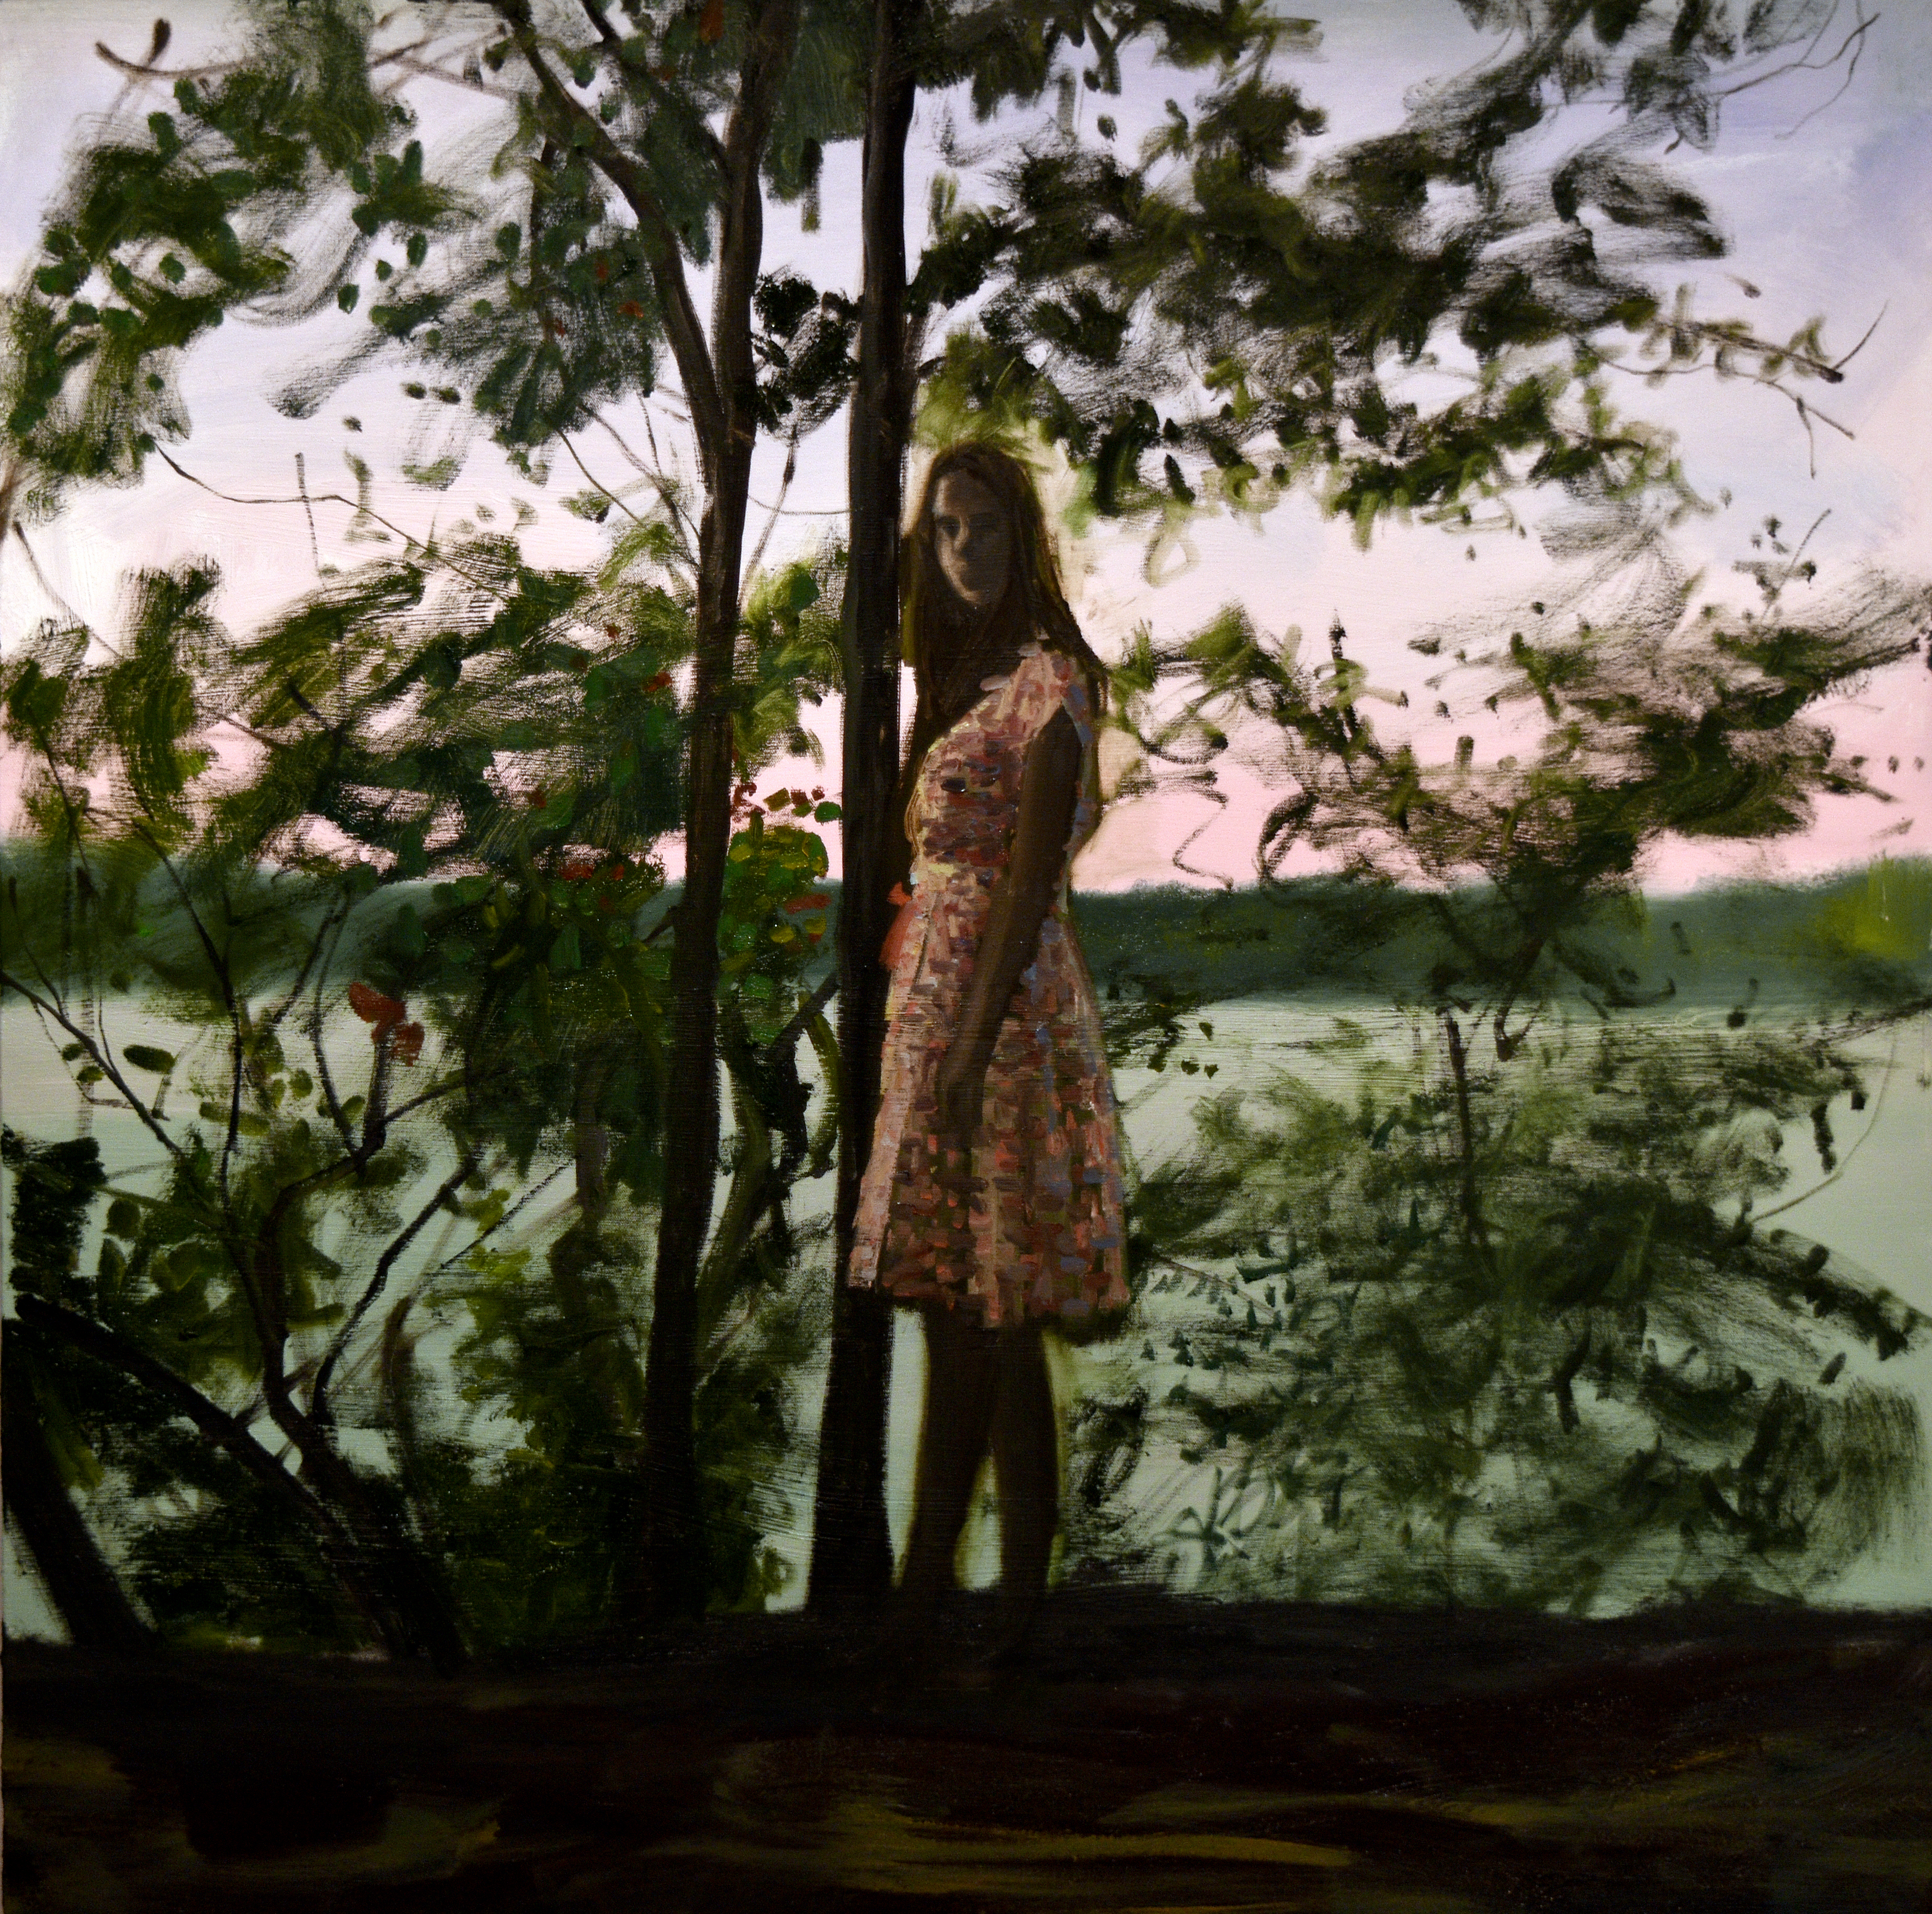 girl stands in front of tree in dusk light